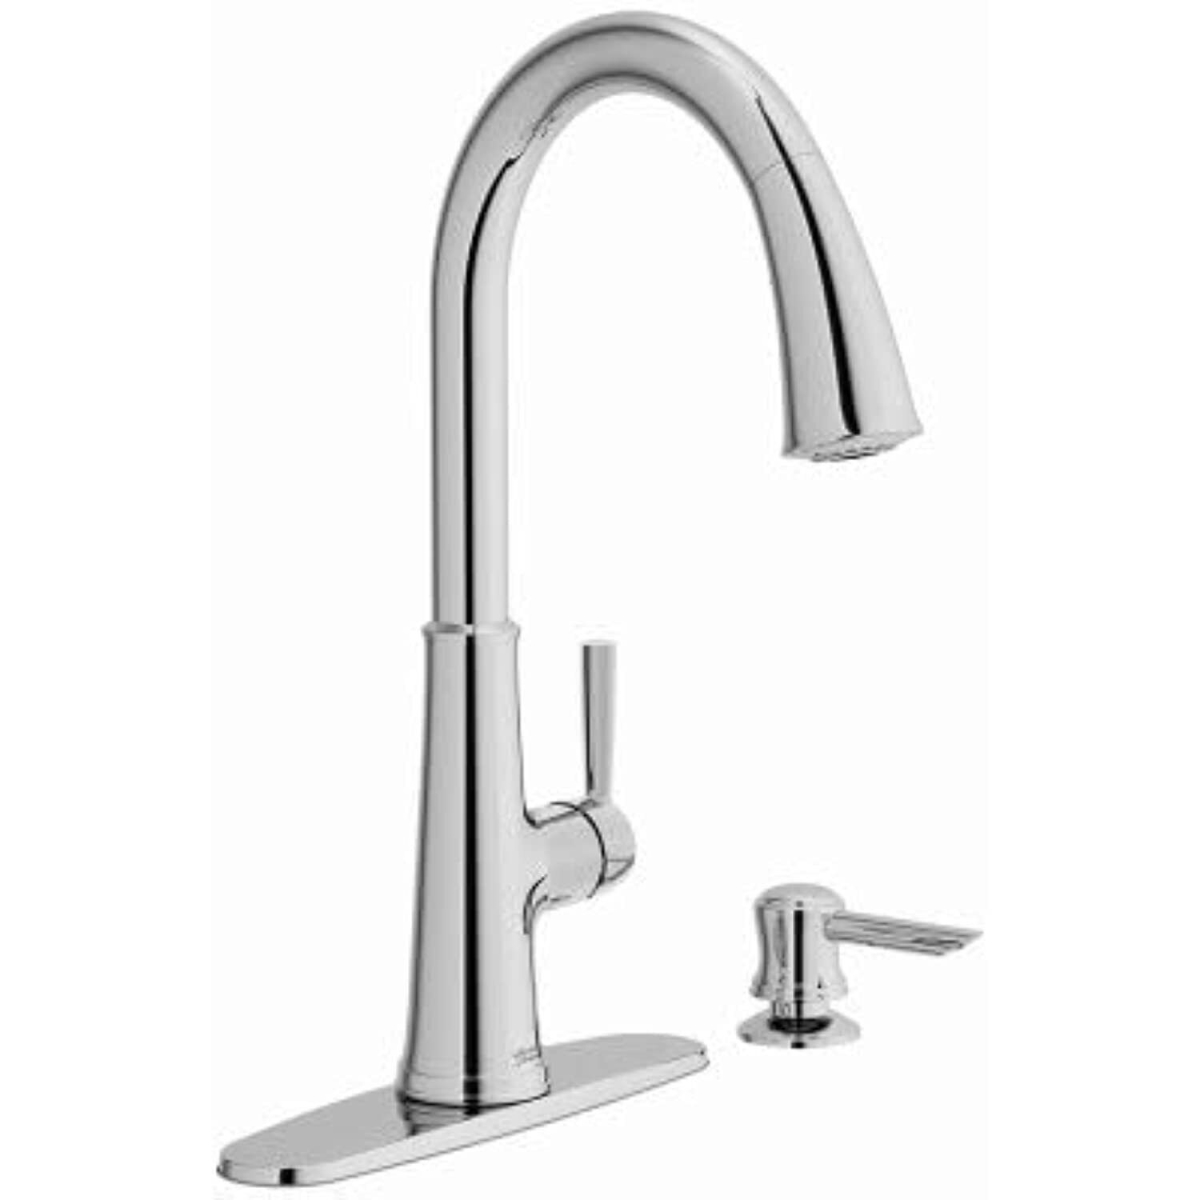 196805 Pull Down Kitchen Faucet with Dispenser, Stainless Steel -  American Standard